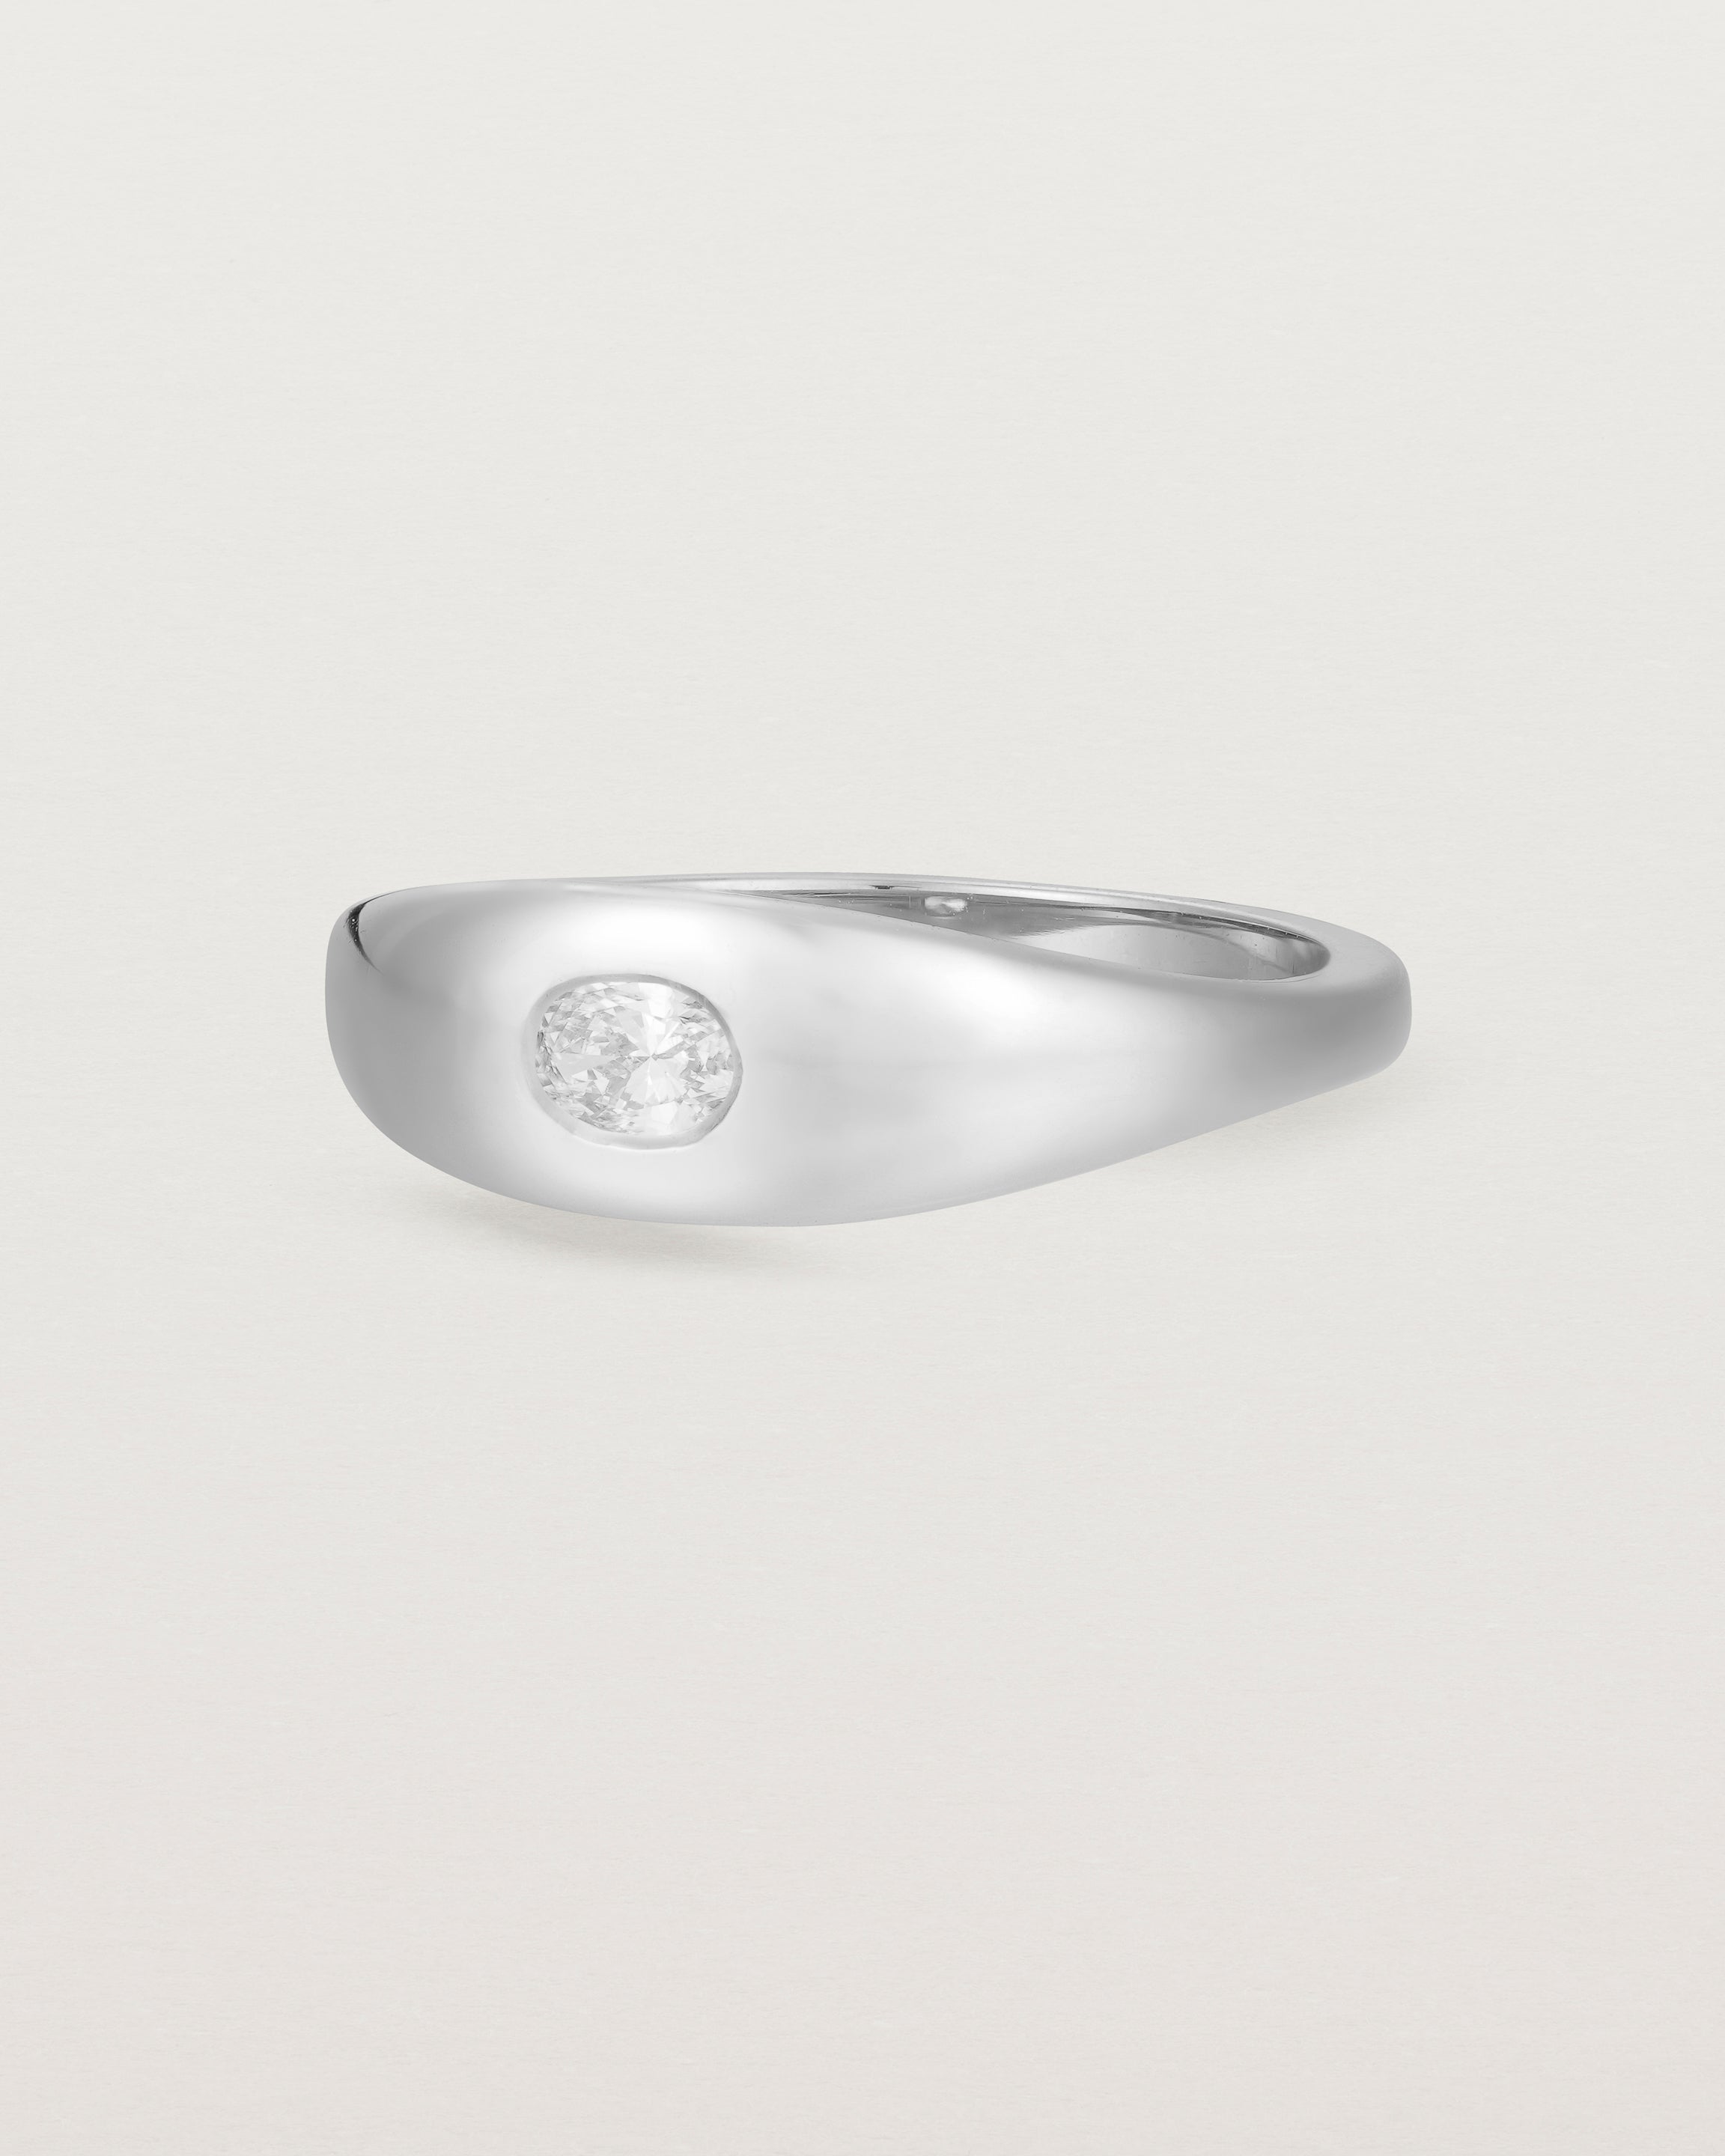 Angled view of the Seule Single Ring | Diamond | White Gold.